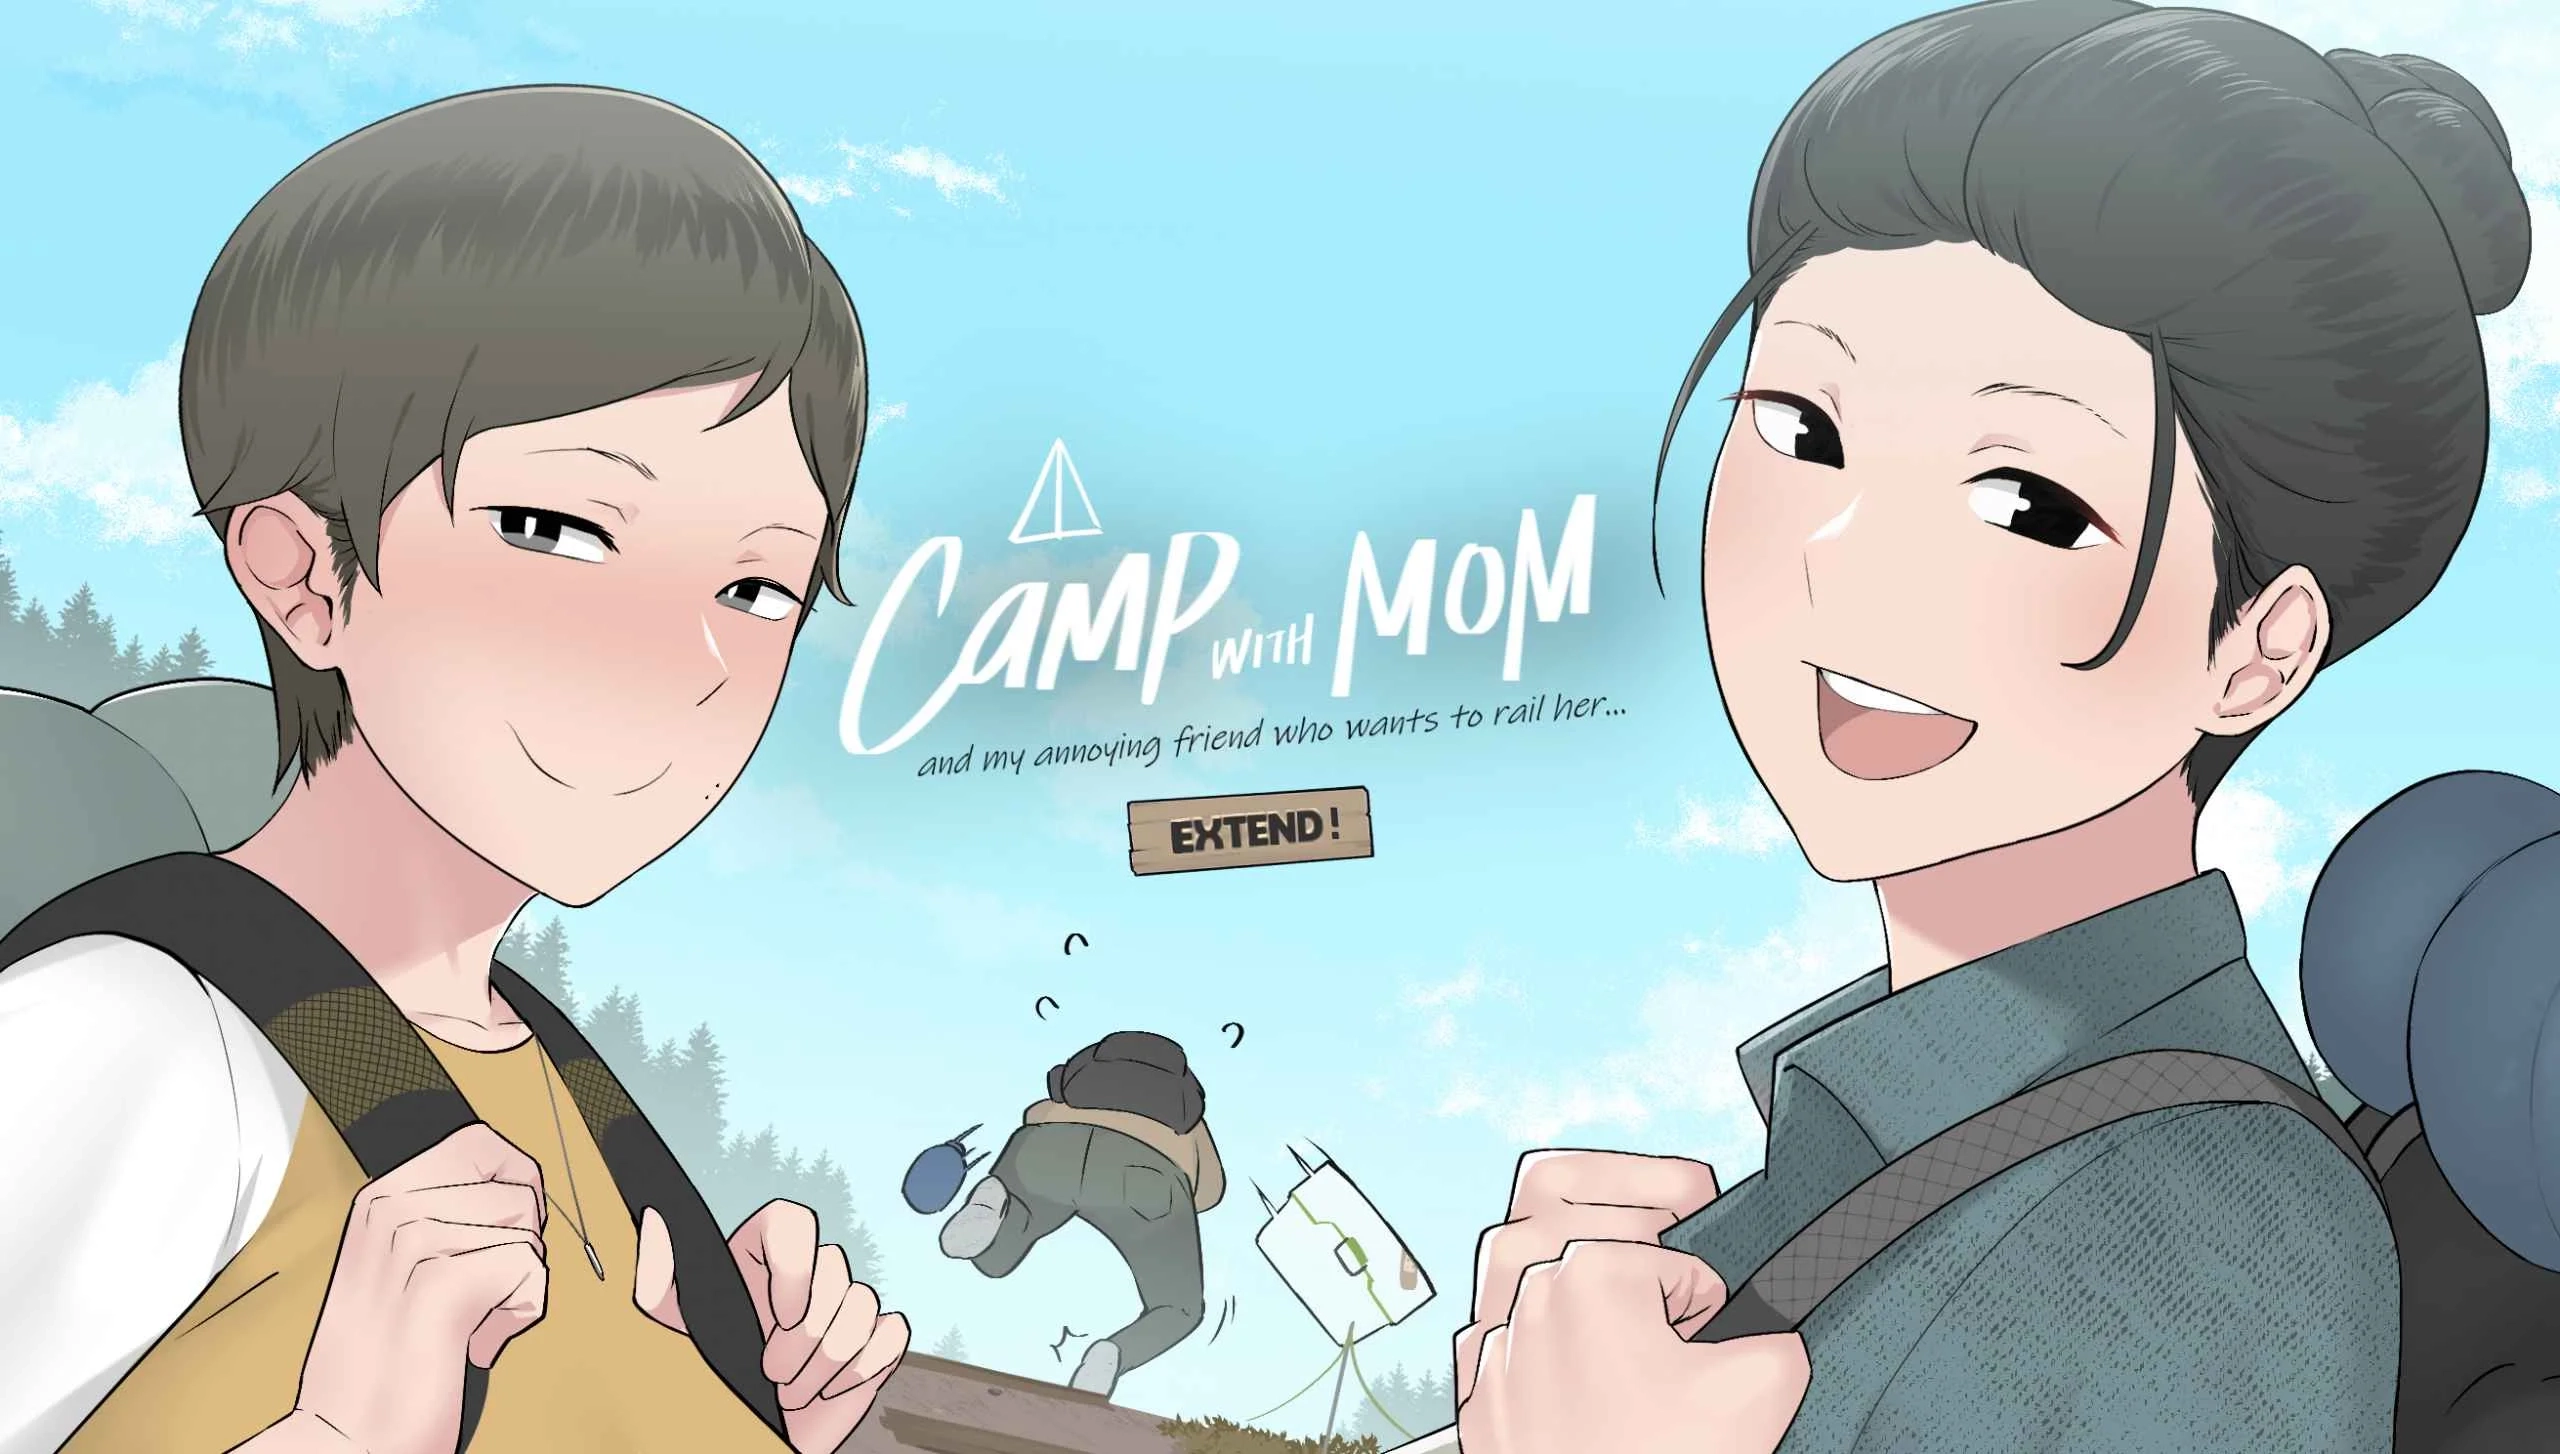 Camping with mom extend